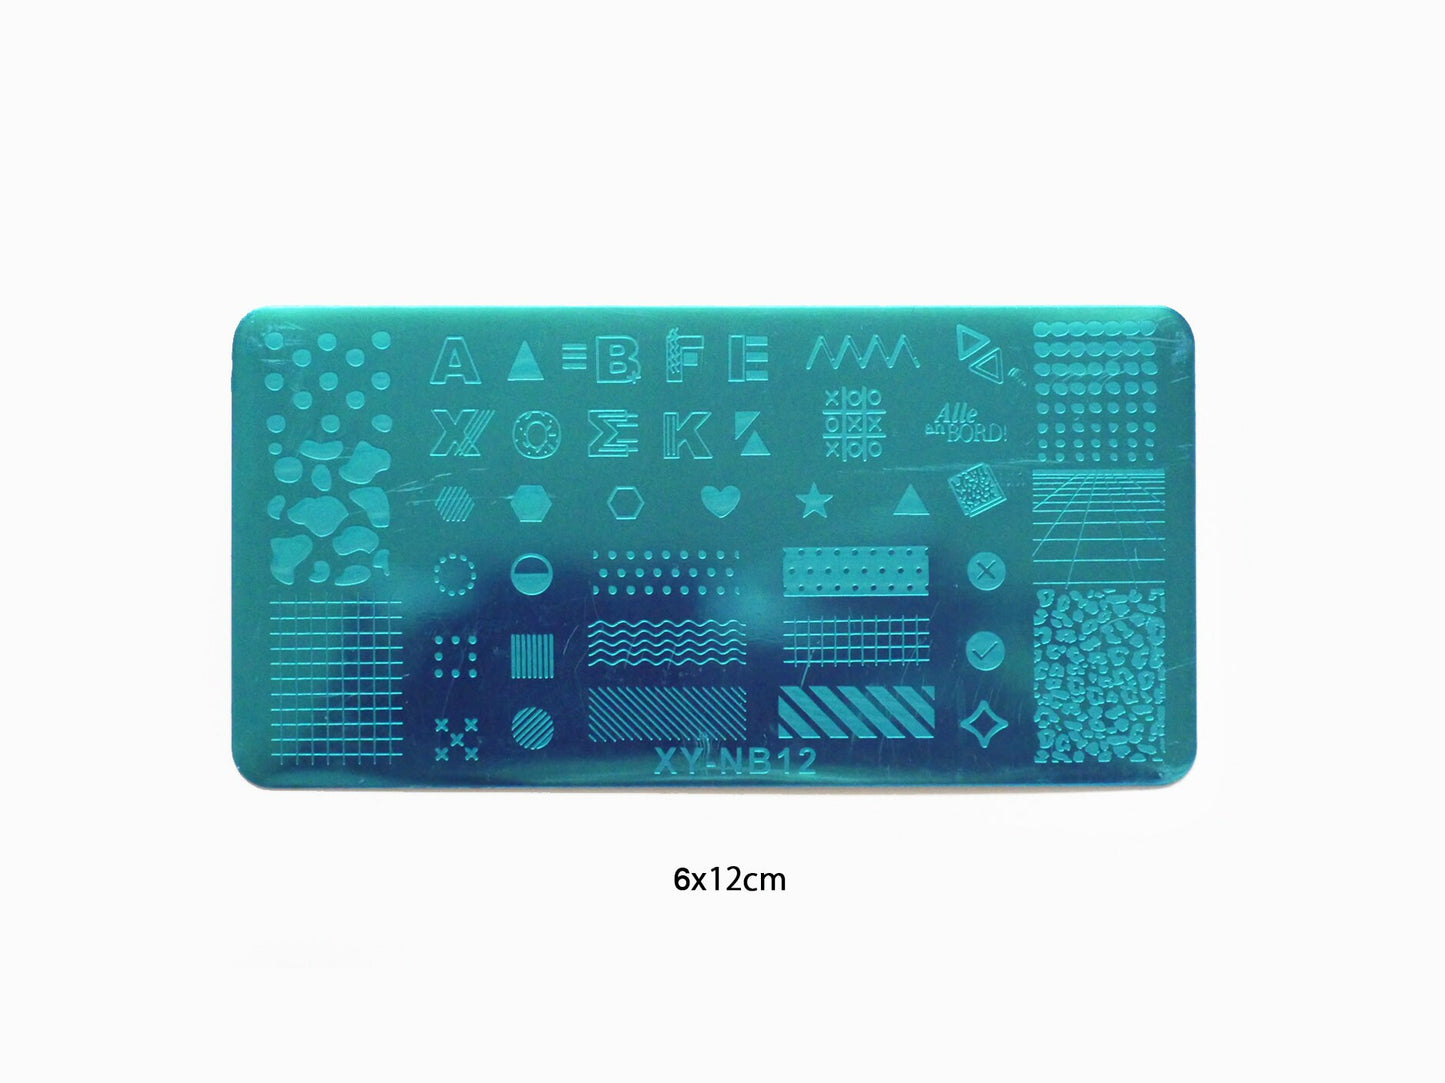 Greens Plants & Shapes Nail Art Stamping Plates/ Plaids Stamps Image Plates Manicure Nail Designs DIY/ Stamping Templates